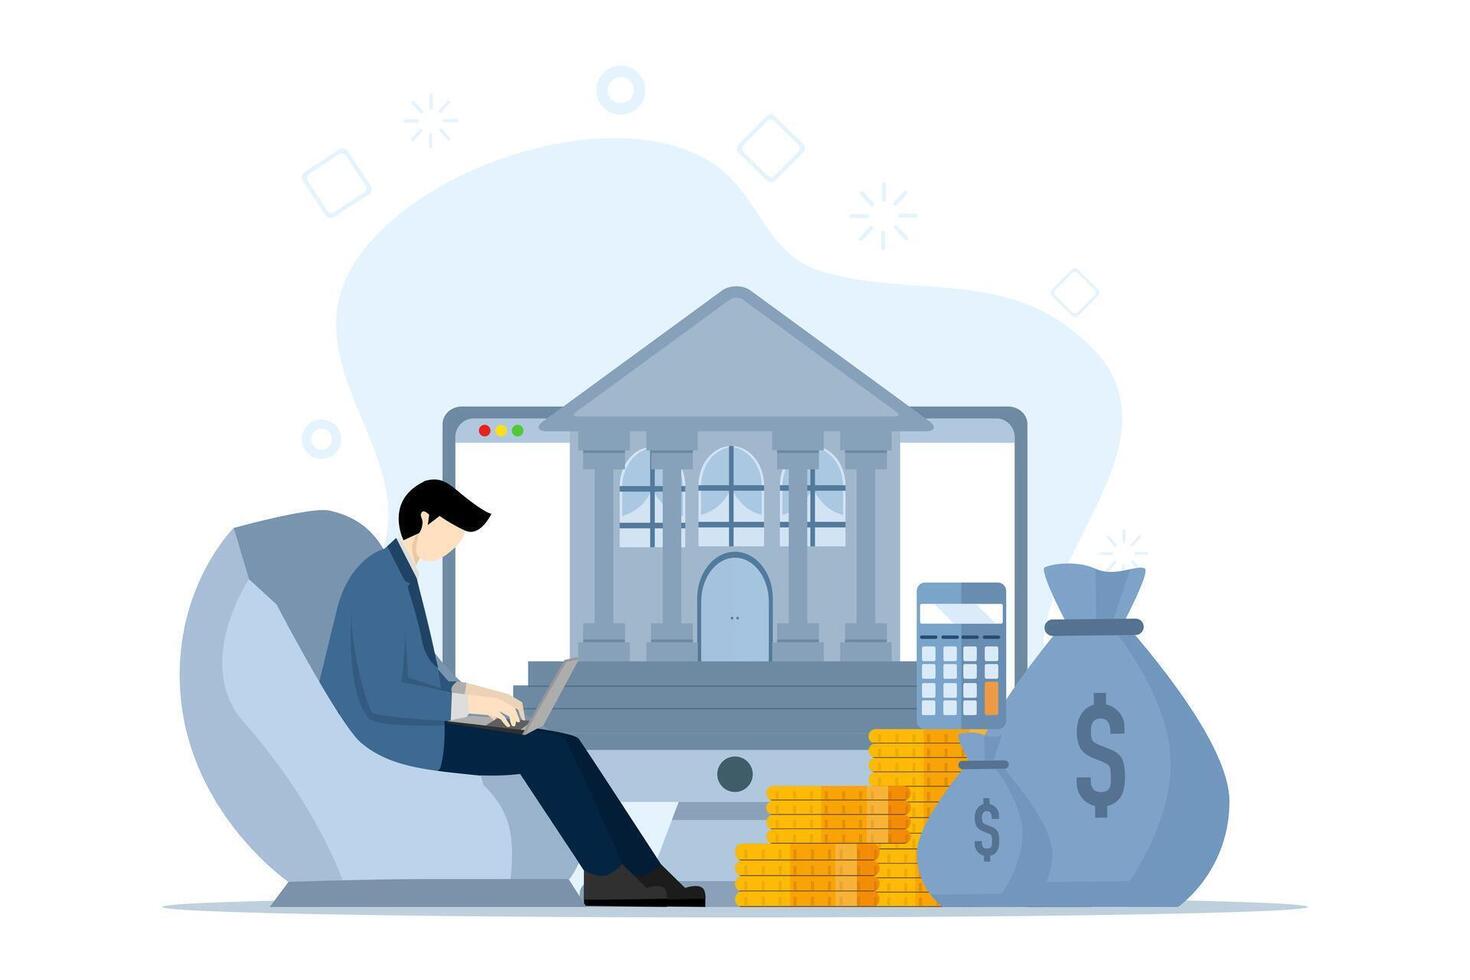 Public financial audit concept. Coins and banknotes lying near government finance department or tax office column building. Flat vector illustration on white background.